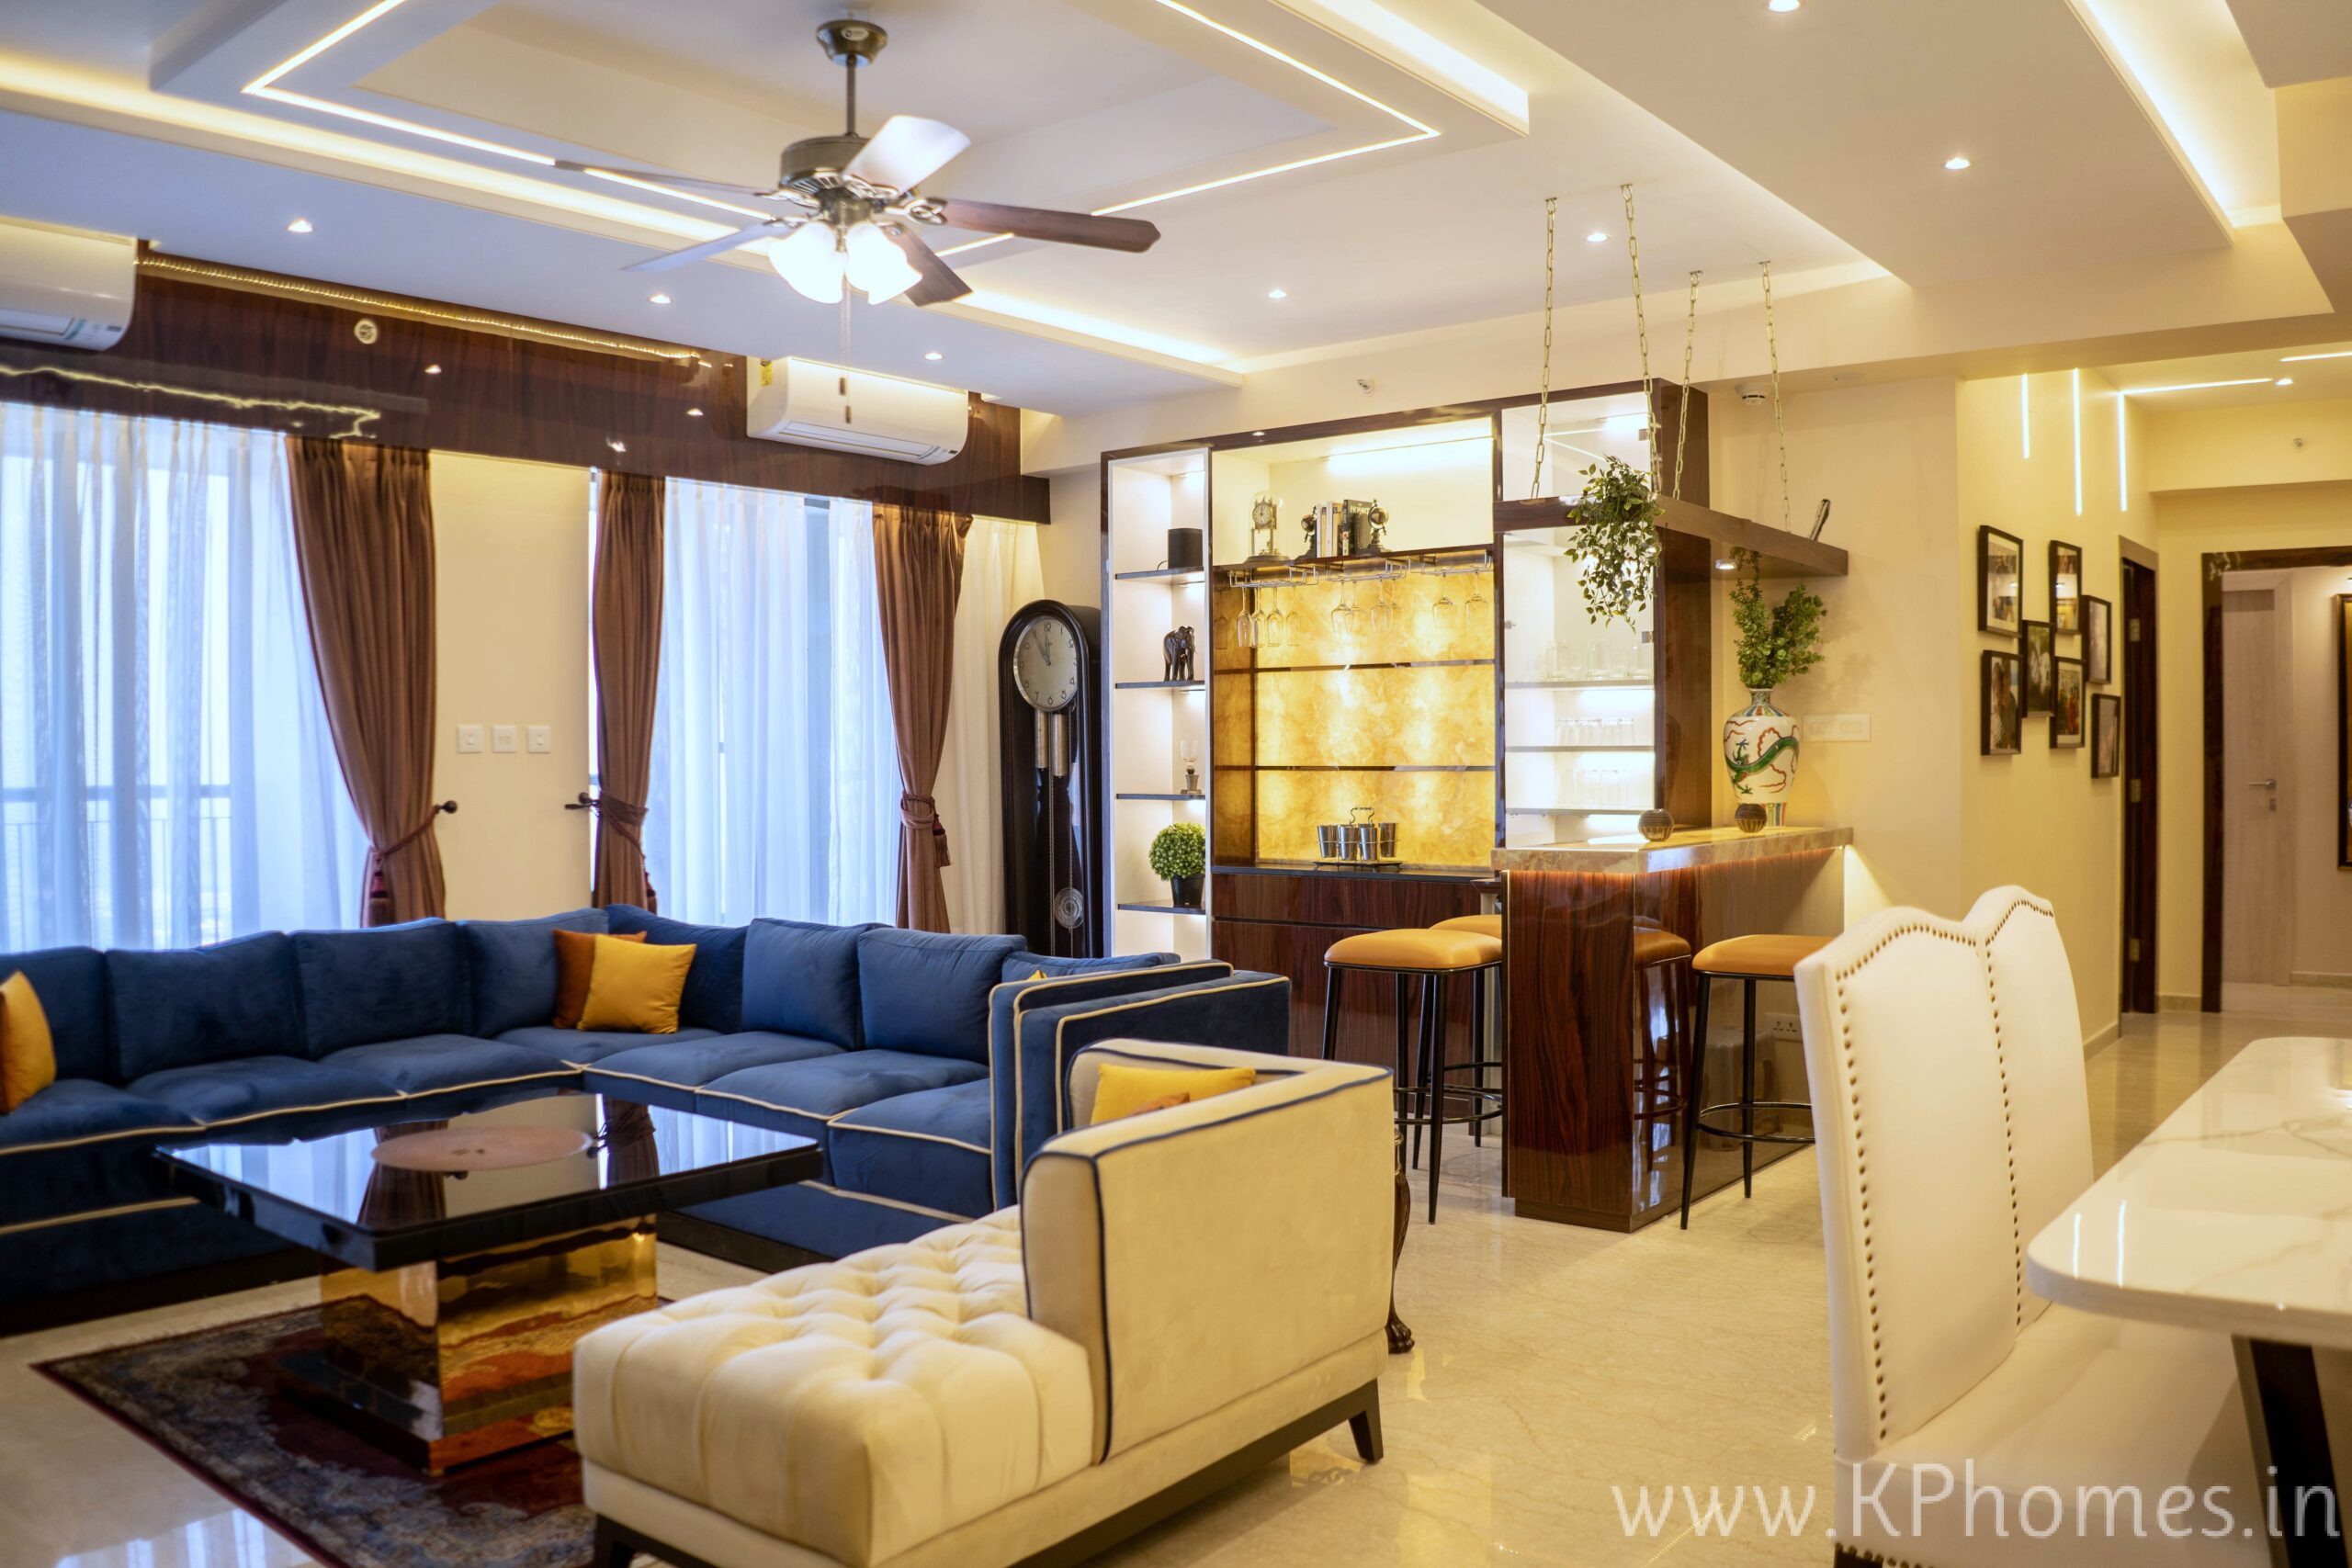 KpHomes is a well-known Luxury interior design firm based in Kolkata.